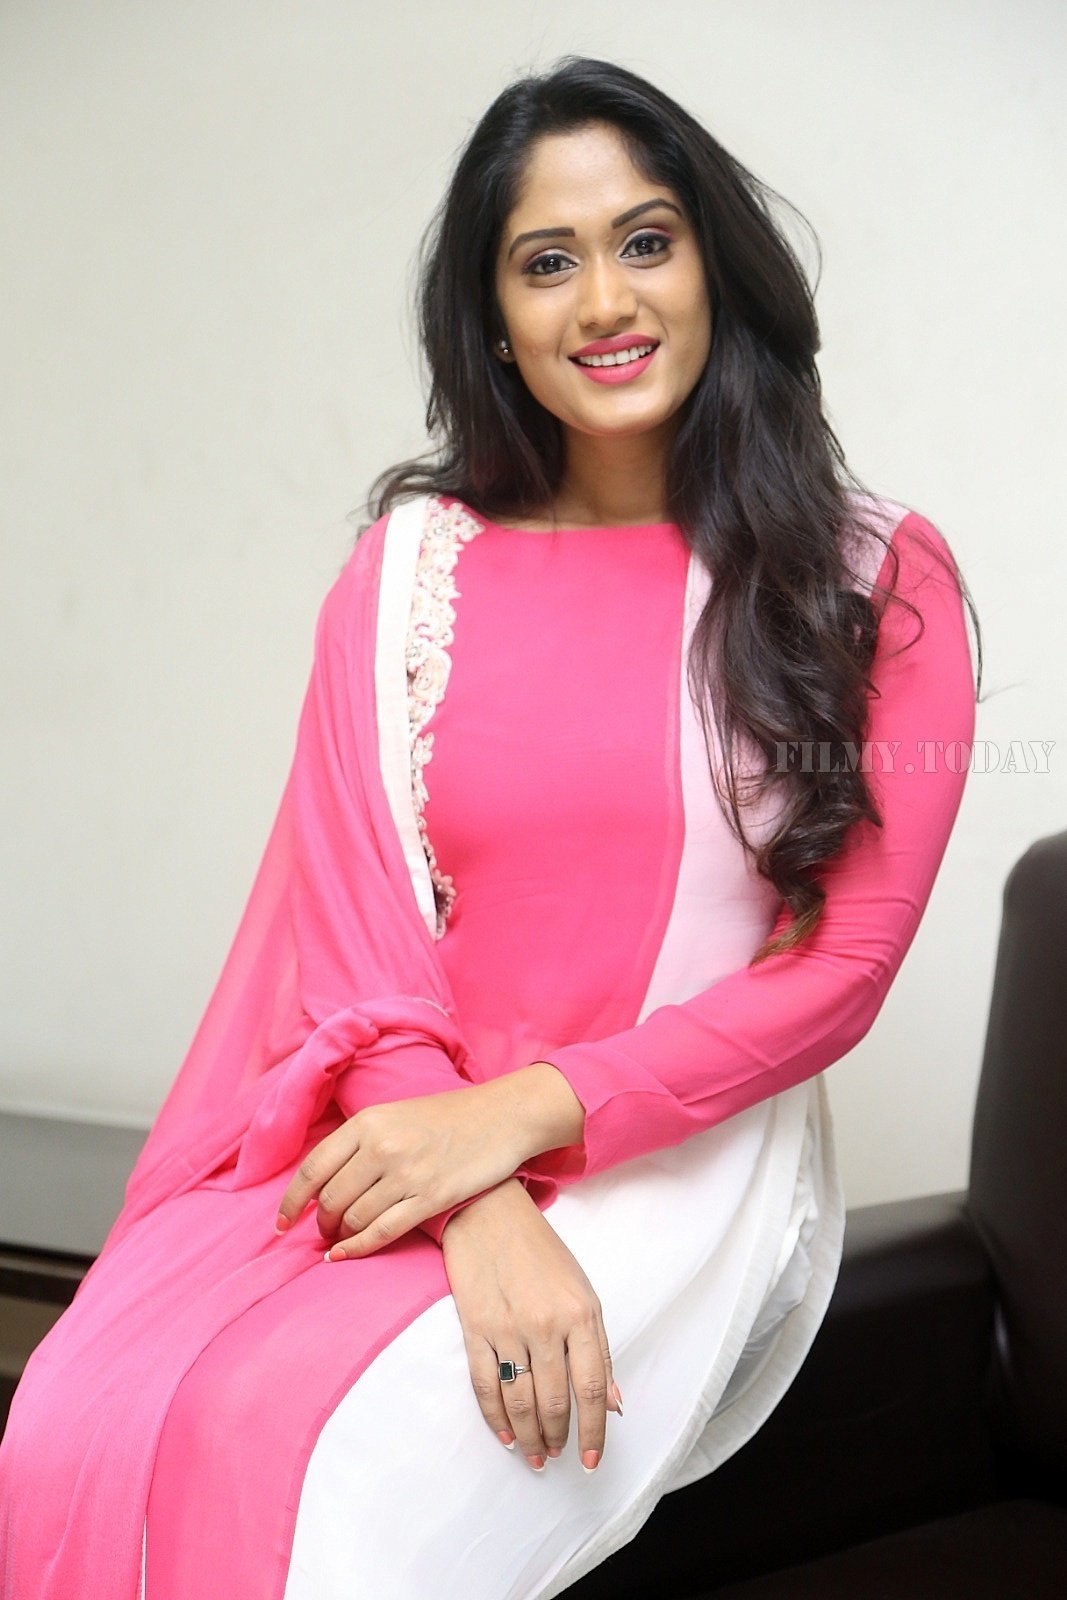 Actress Sowmya Venugopal Stills at Inthalo Ennenni Vinthalo Audio Release | Picture 1566209